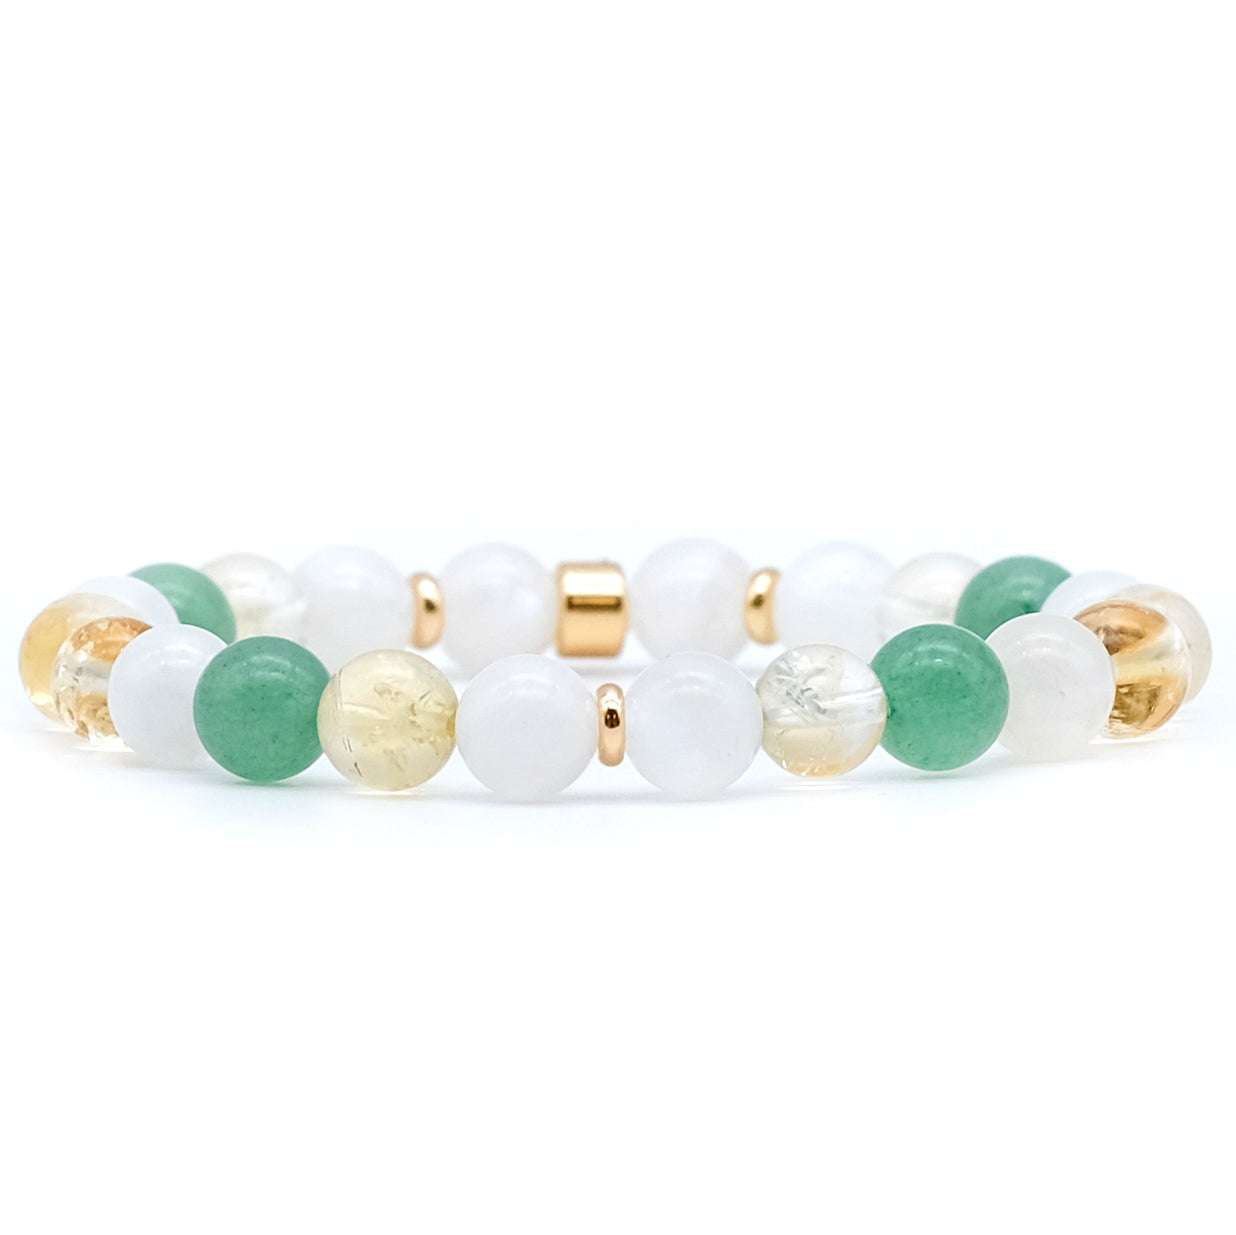 An aventurine, moonstone and citrine gemstone bracelet with gold accessories